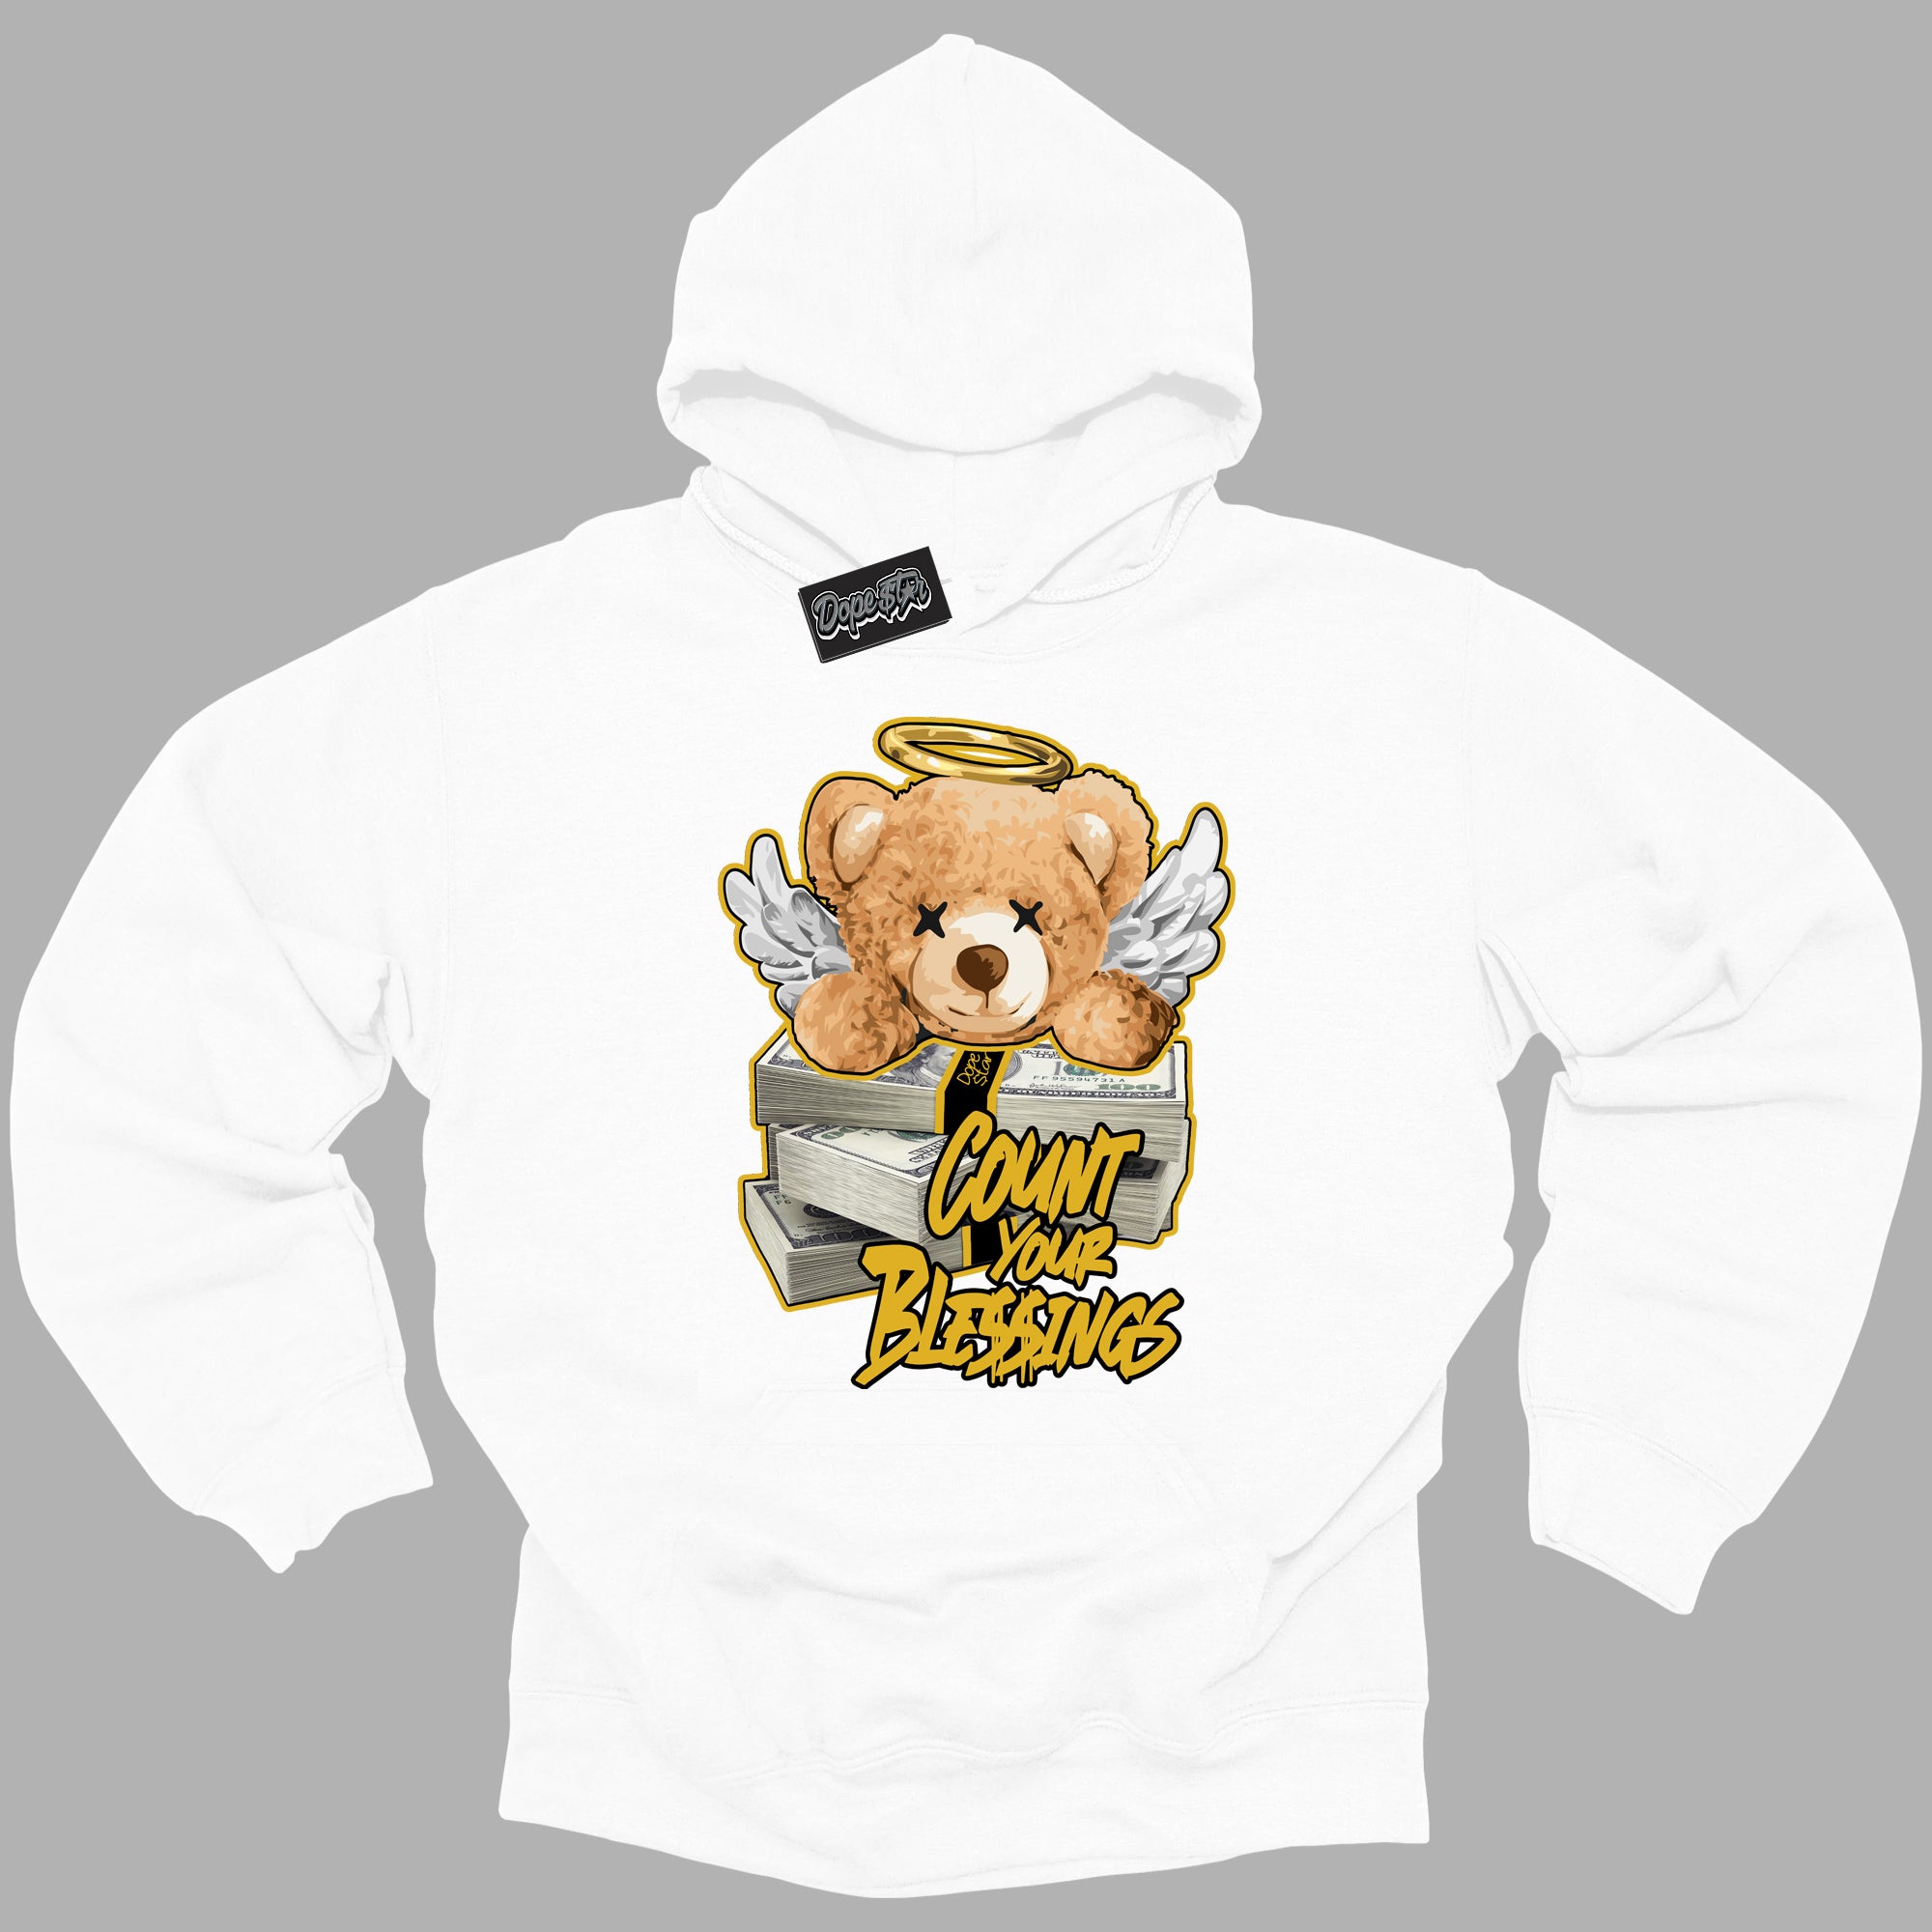 Cool White Hoodie with “ Count Your Blessings ”  design that Perfectly Matches Yellow Ochre 6s Sneakers.